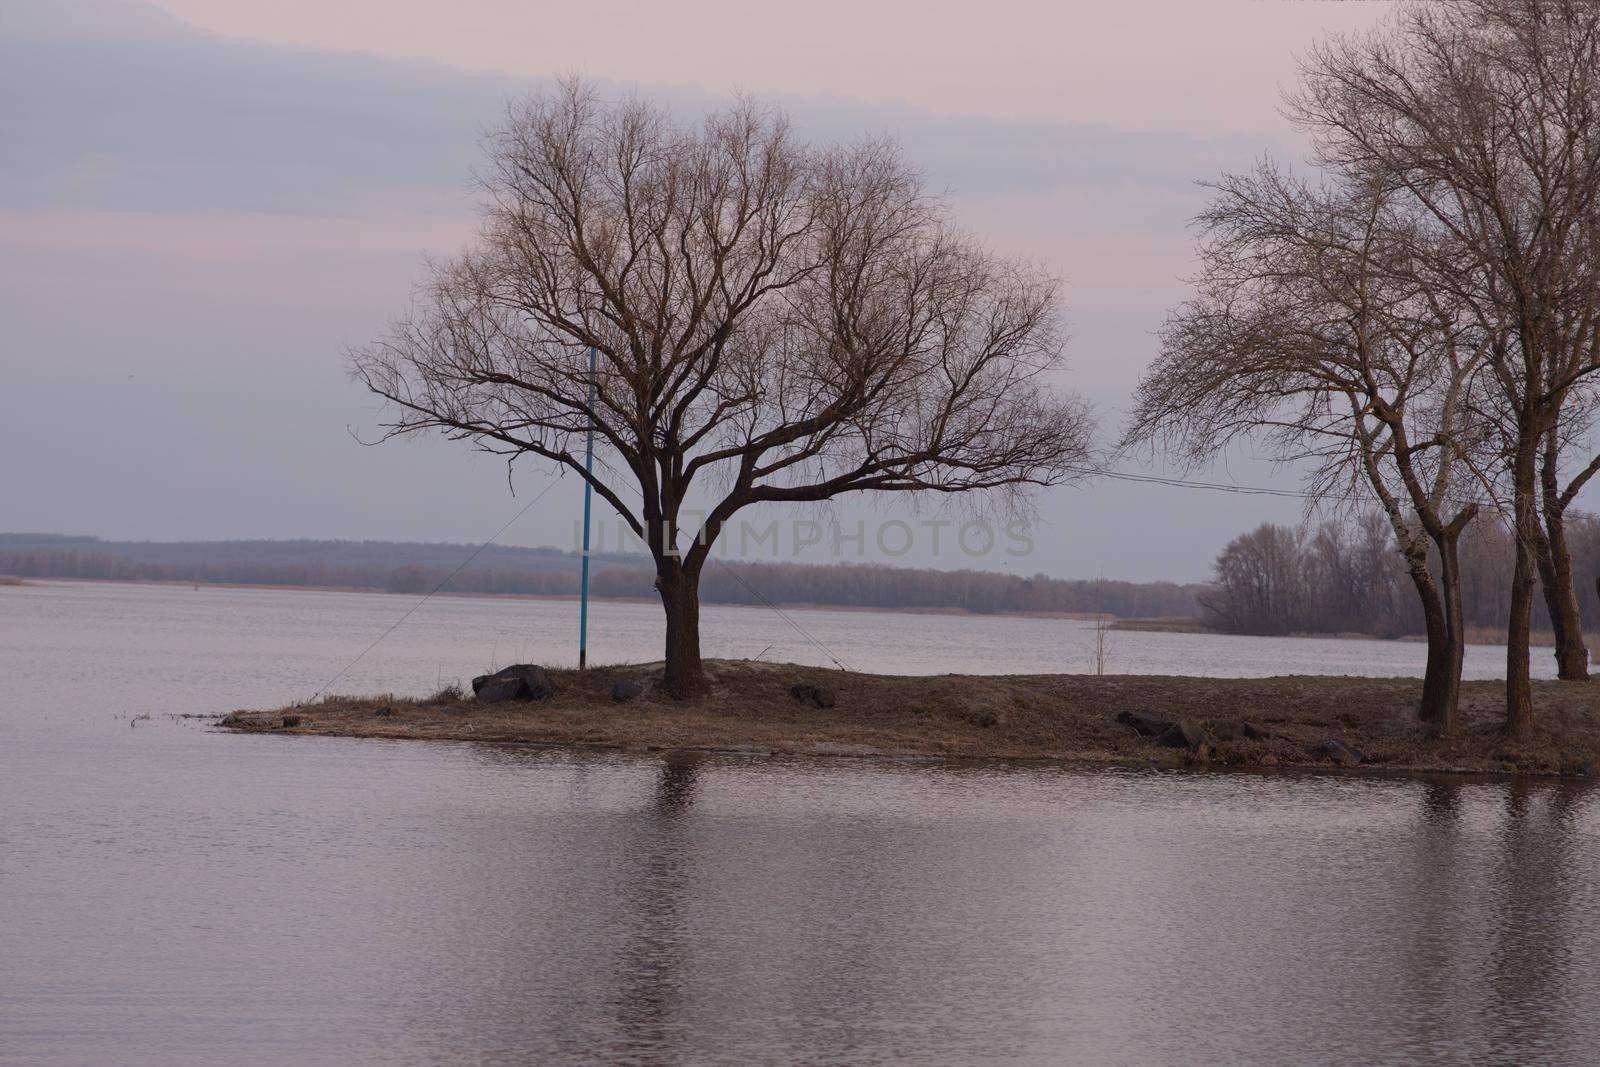 A tree without leaves near the water. The river at sunset.